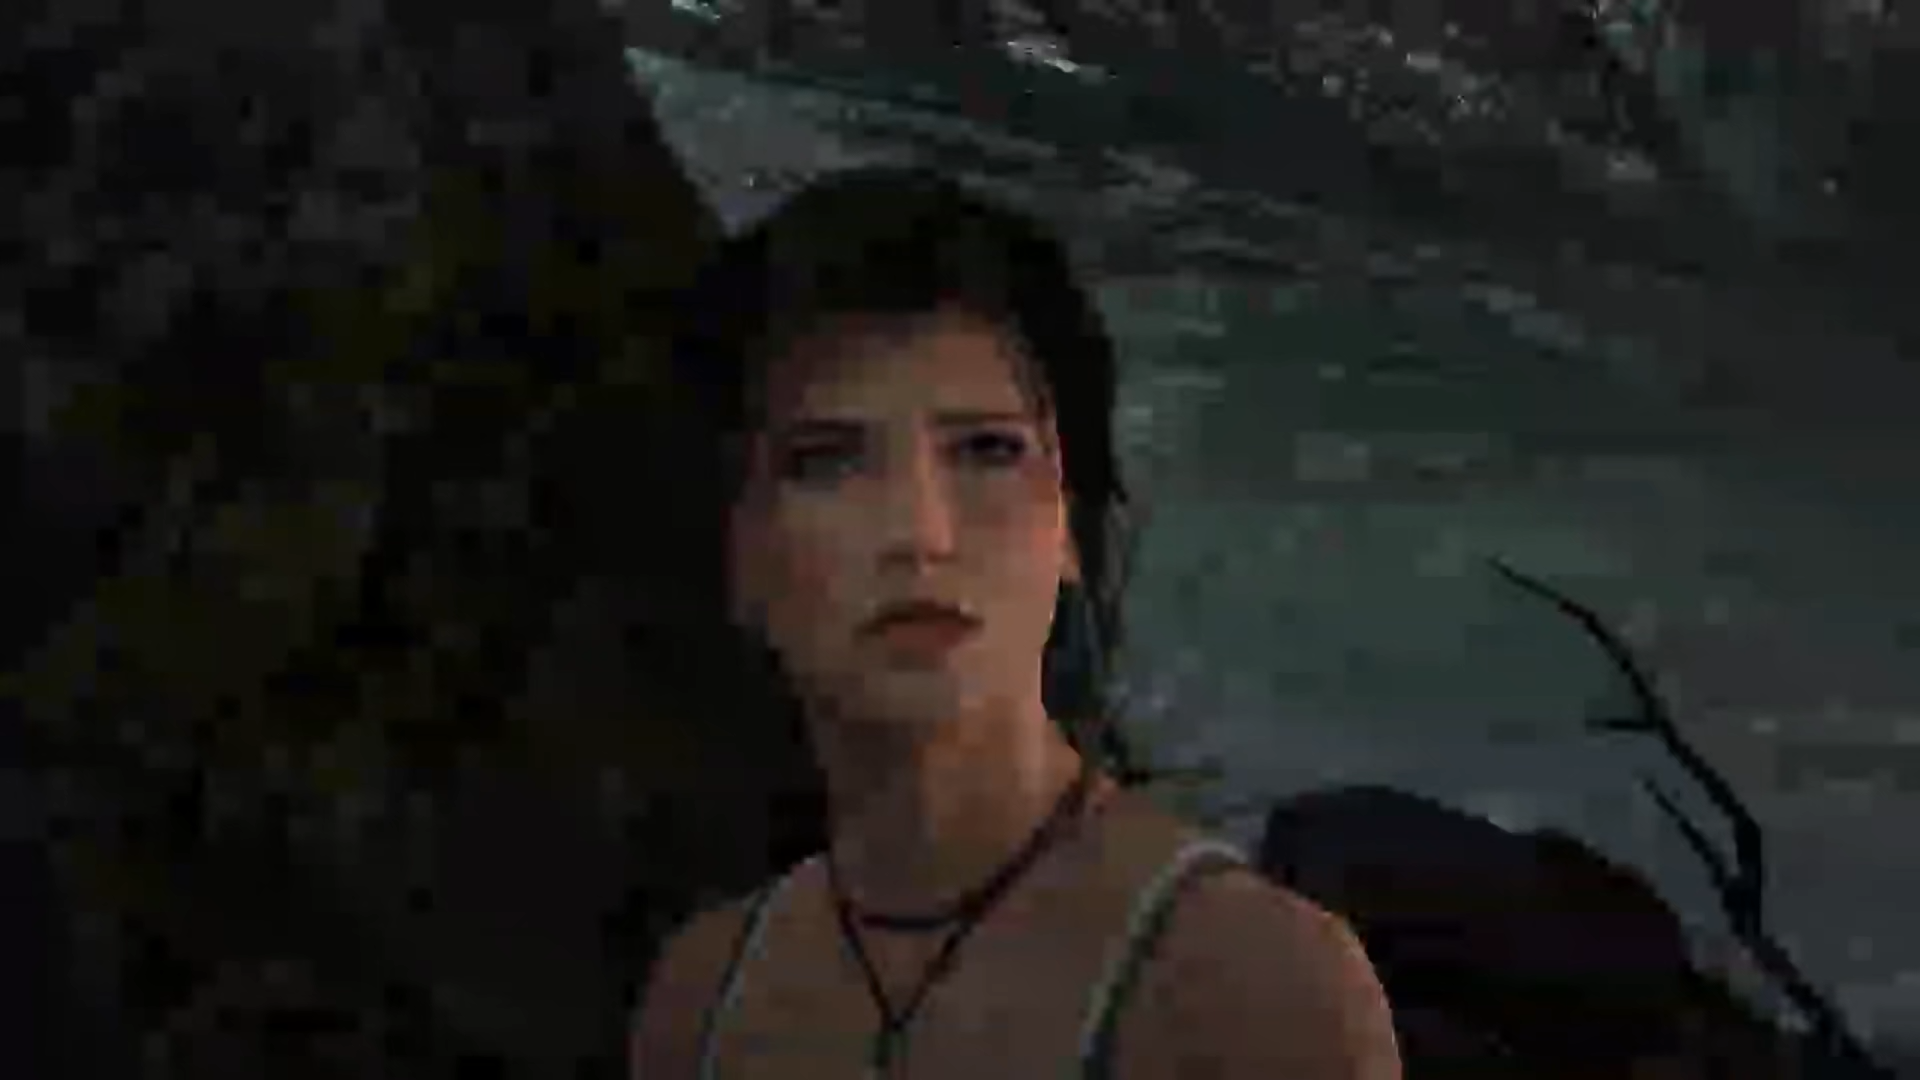 Sudden drop in quality, blurry and pixelated face of Lara